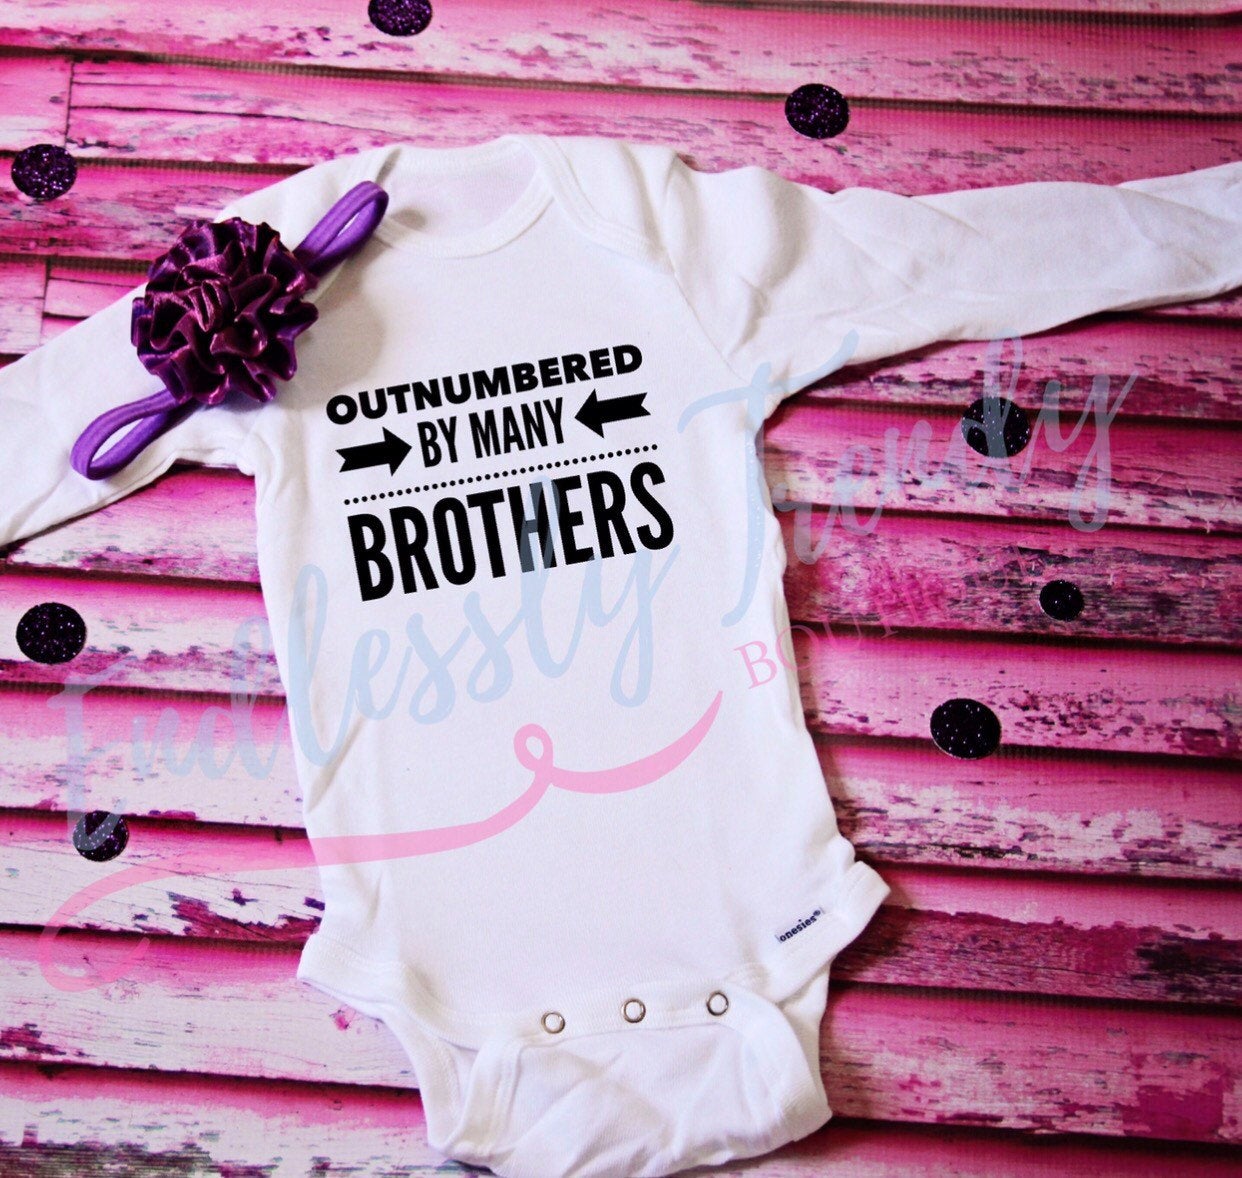 Outnumbered by Many Brothers - Little Sister Tee - - Endlessly Trendy Boutique